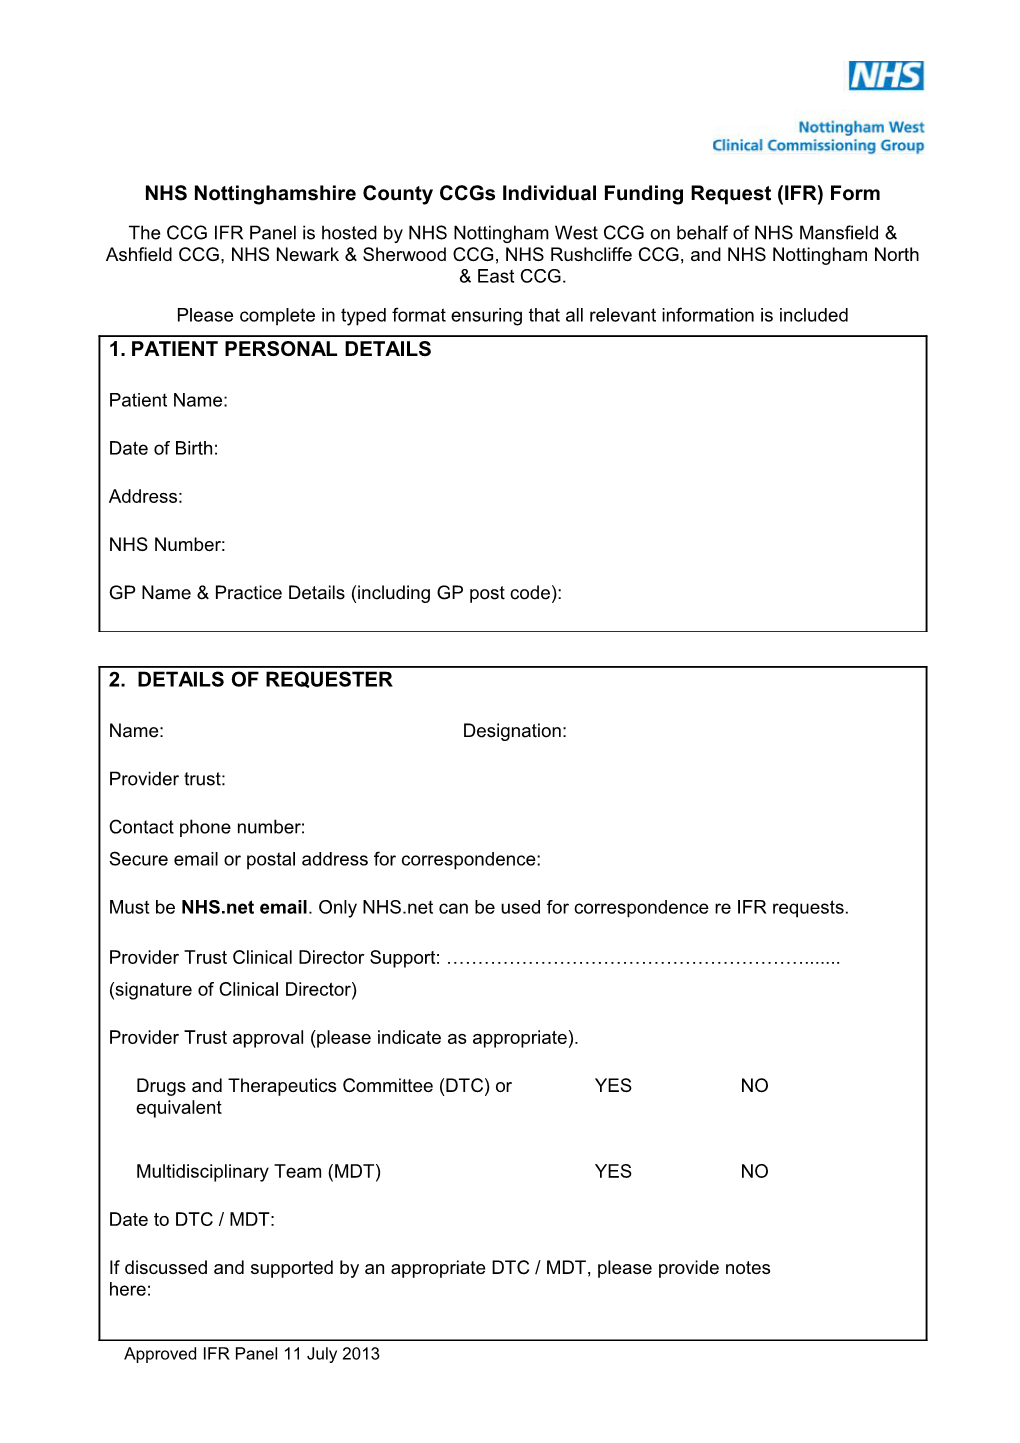 NHS Nottinghamshire County Ccgs Individual Funding Request (IFR) Form